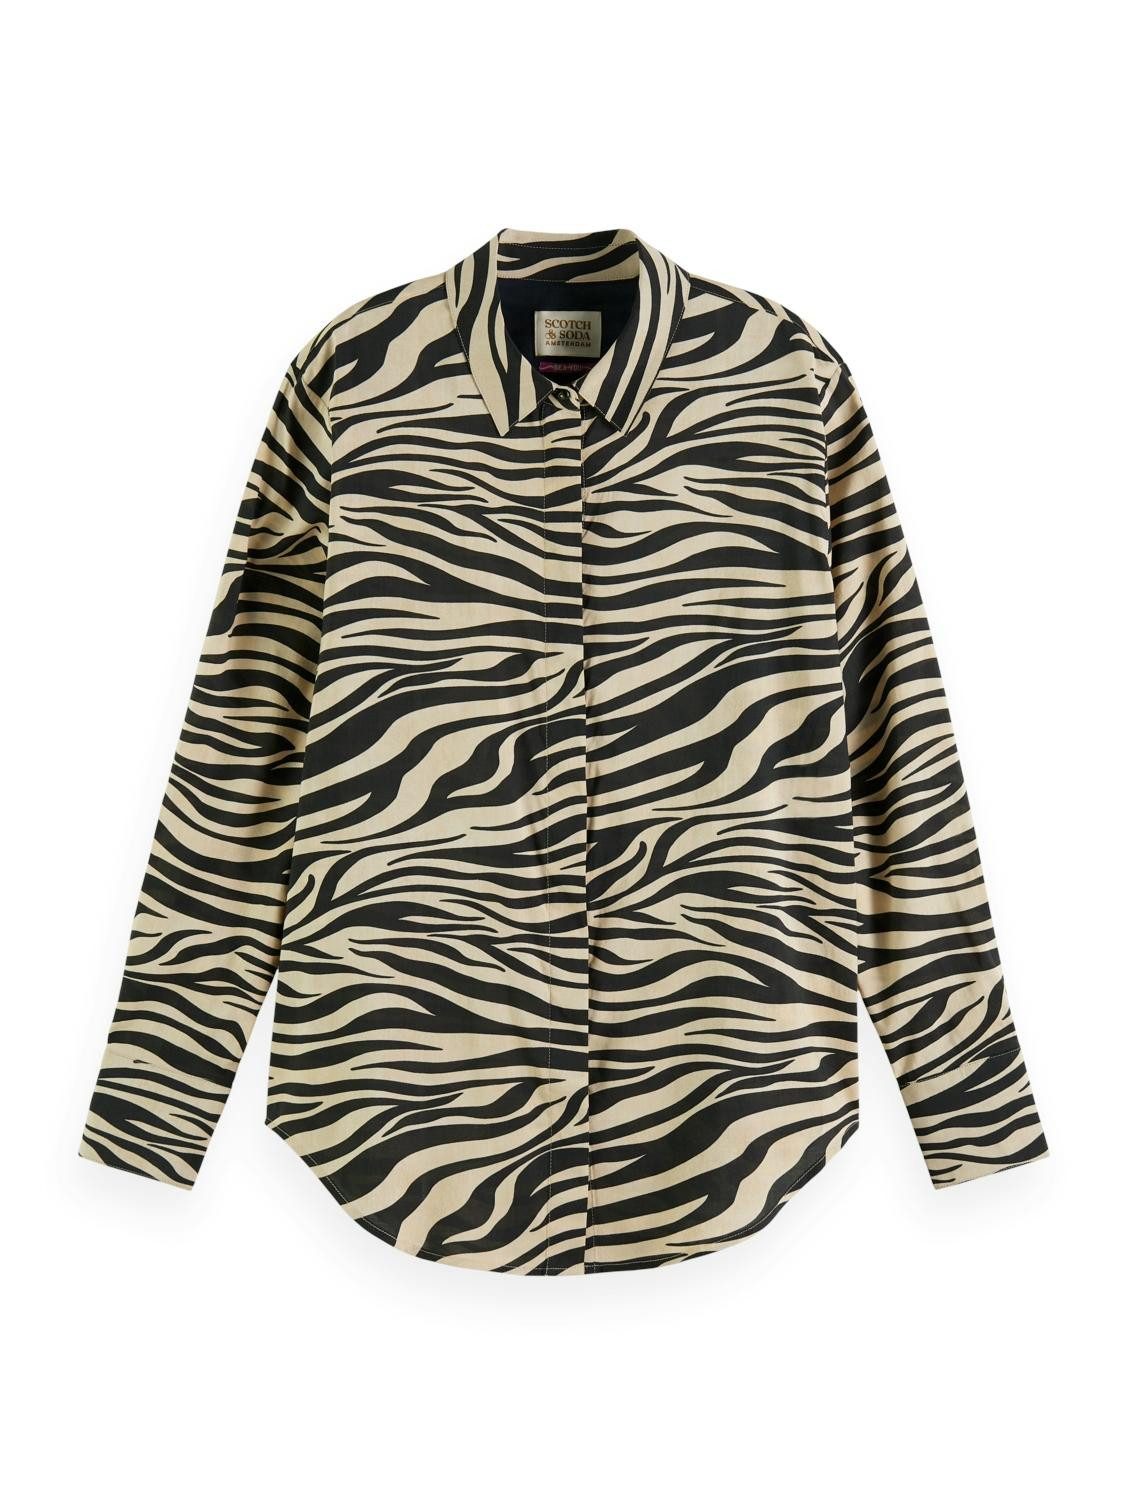 Scotch & Soda T-Shirt Relaxed fit shirt with animal print, tiger